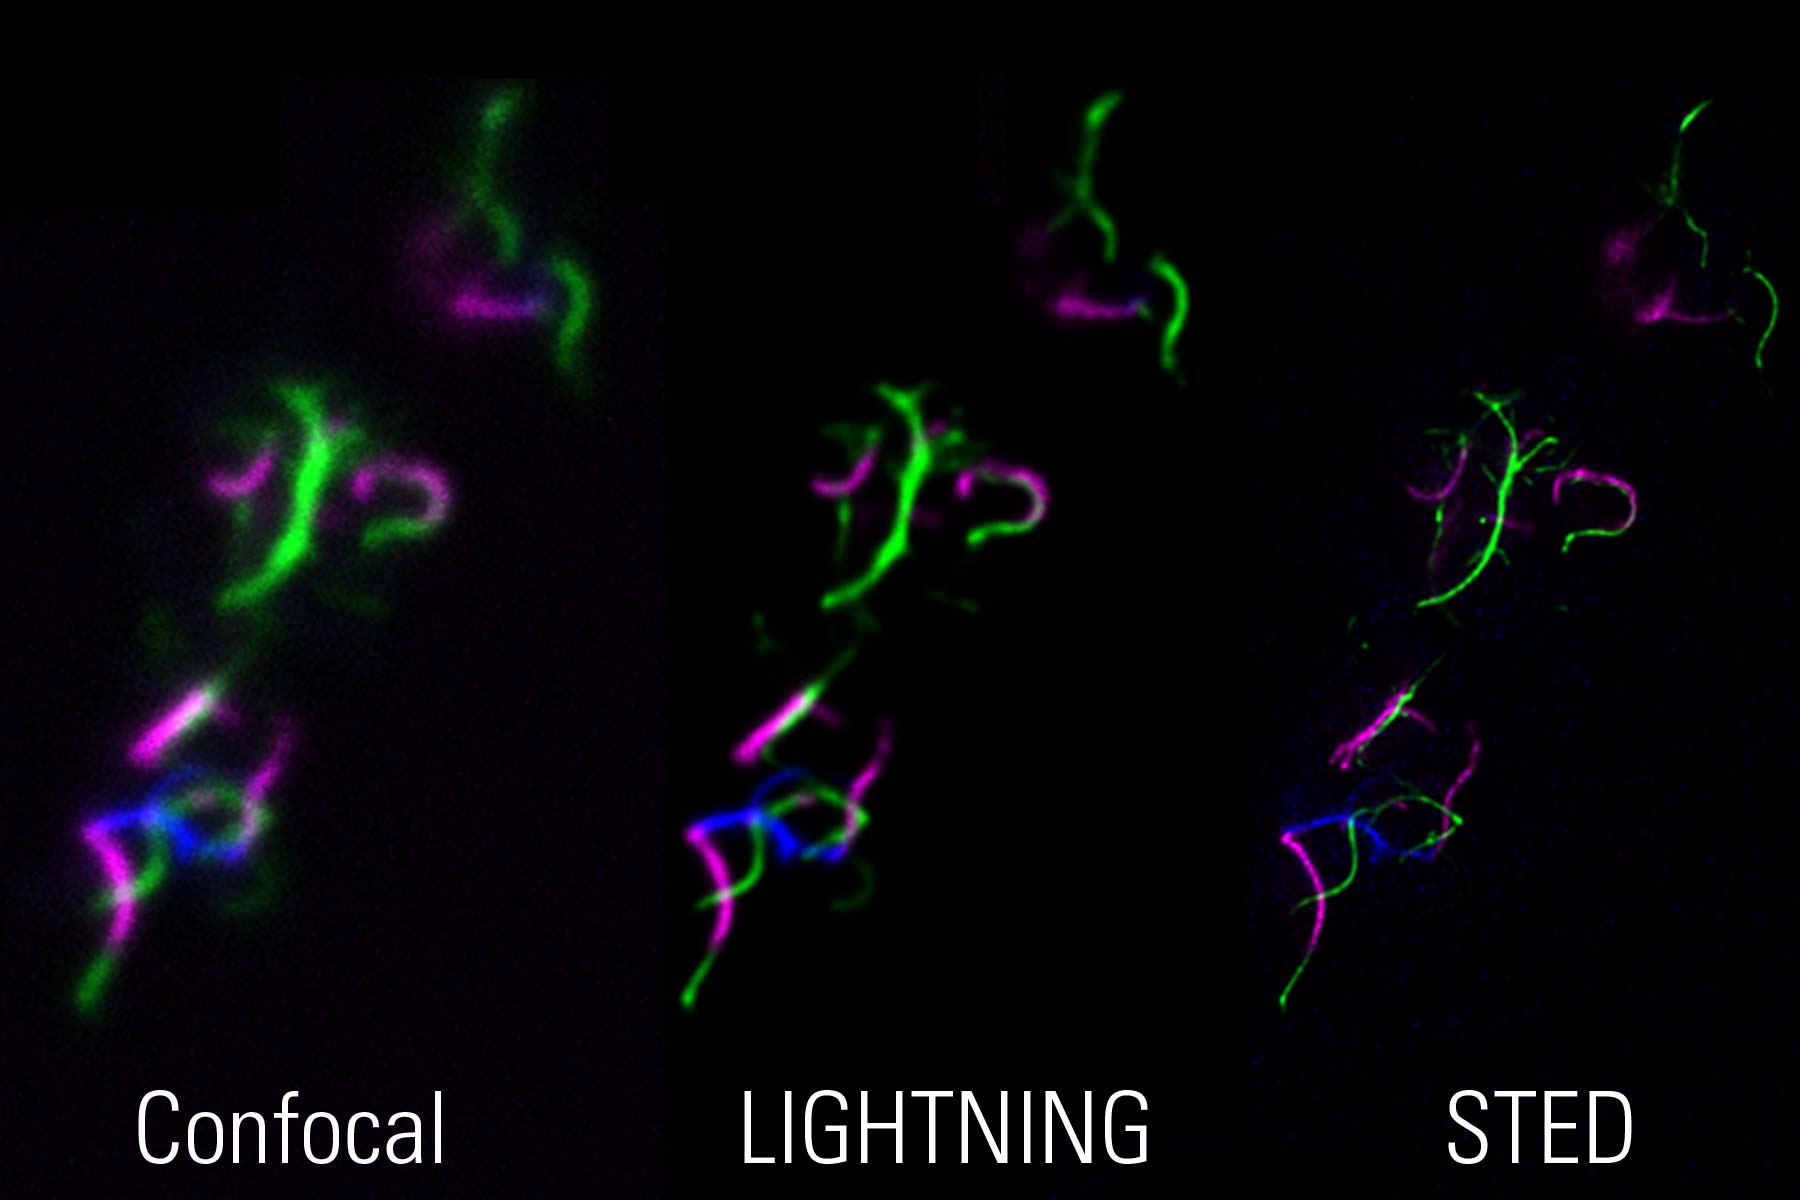 STED for Microbiology: Bacterial flagella visualized with correlative three-color confocal-LIGHTNING-STED imaging which enables the investigation and validation of samples using complementary approaches. Sample courtesy of Marc Erhardt, Humboldt-Universität, Berlin, Germany.